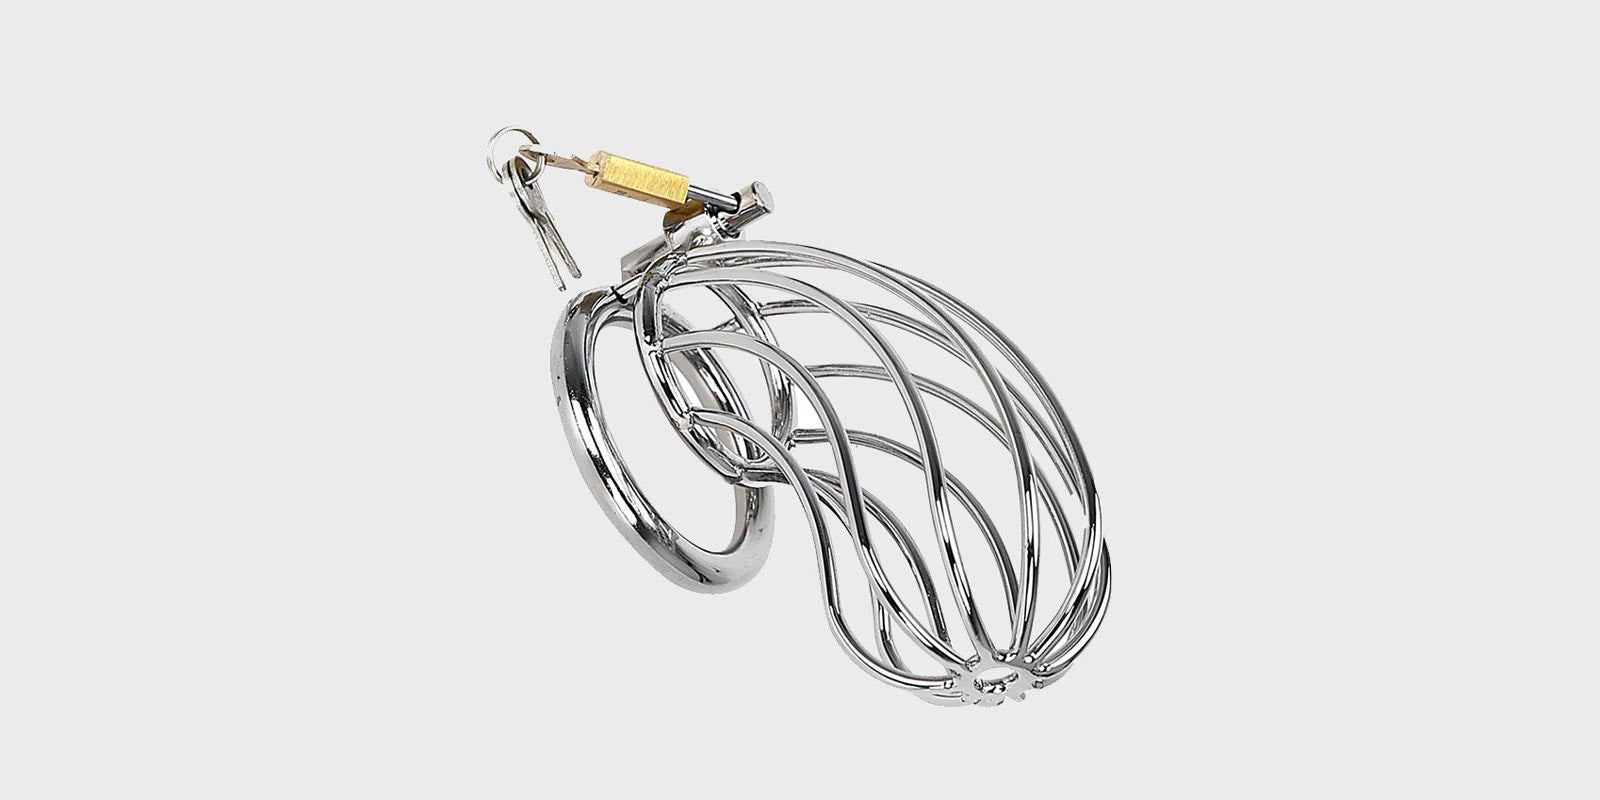 A steel chastity cage known as the bird cage